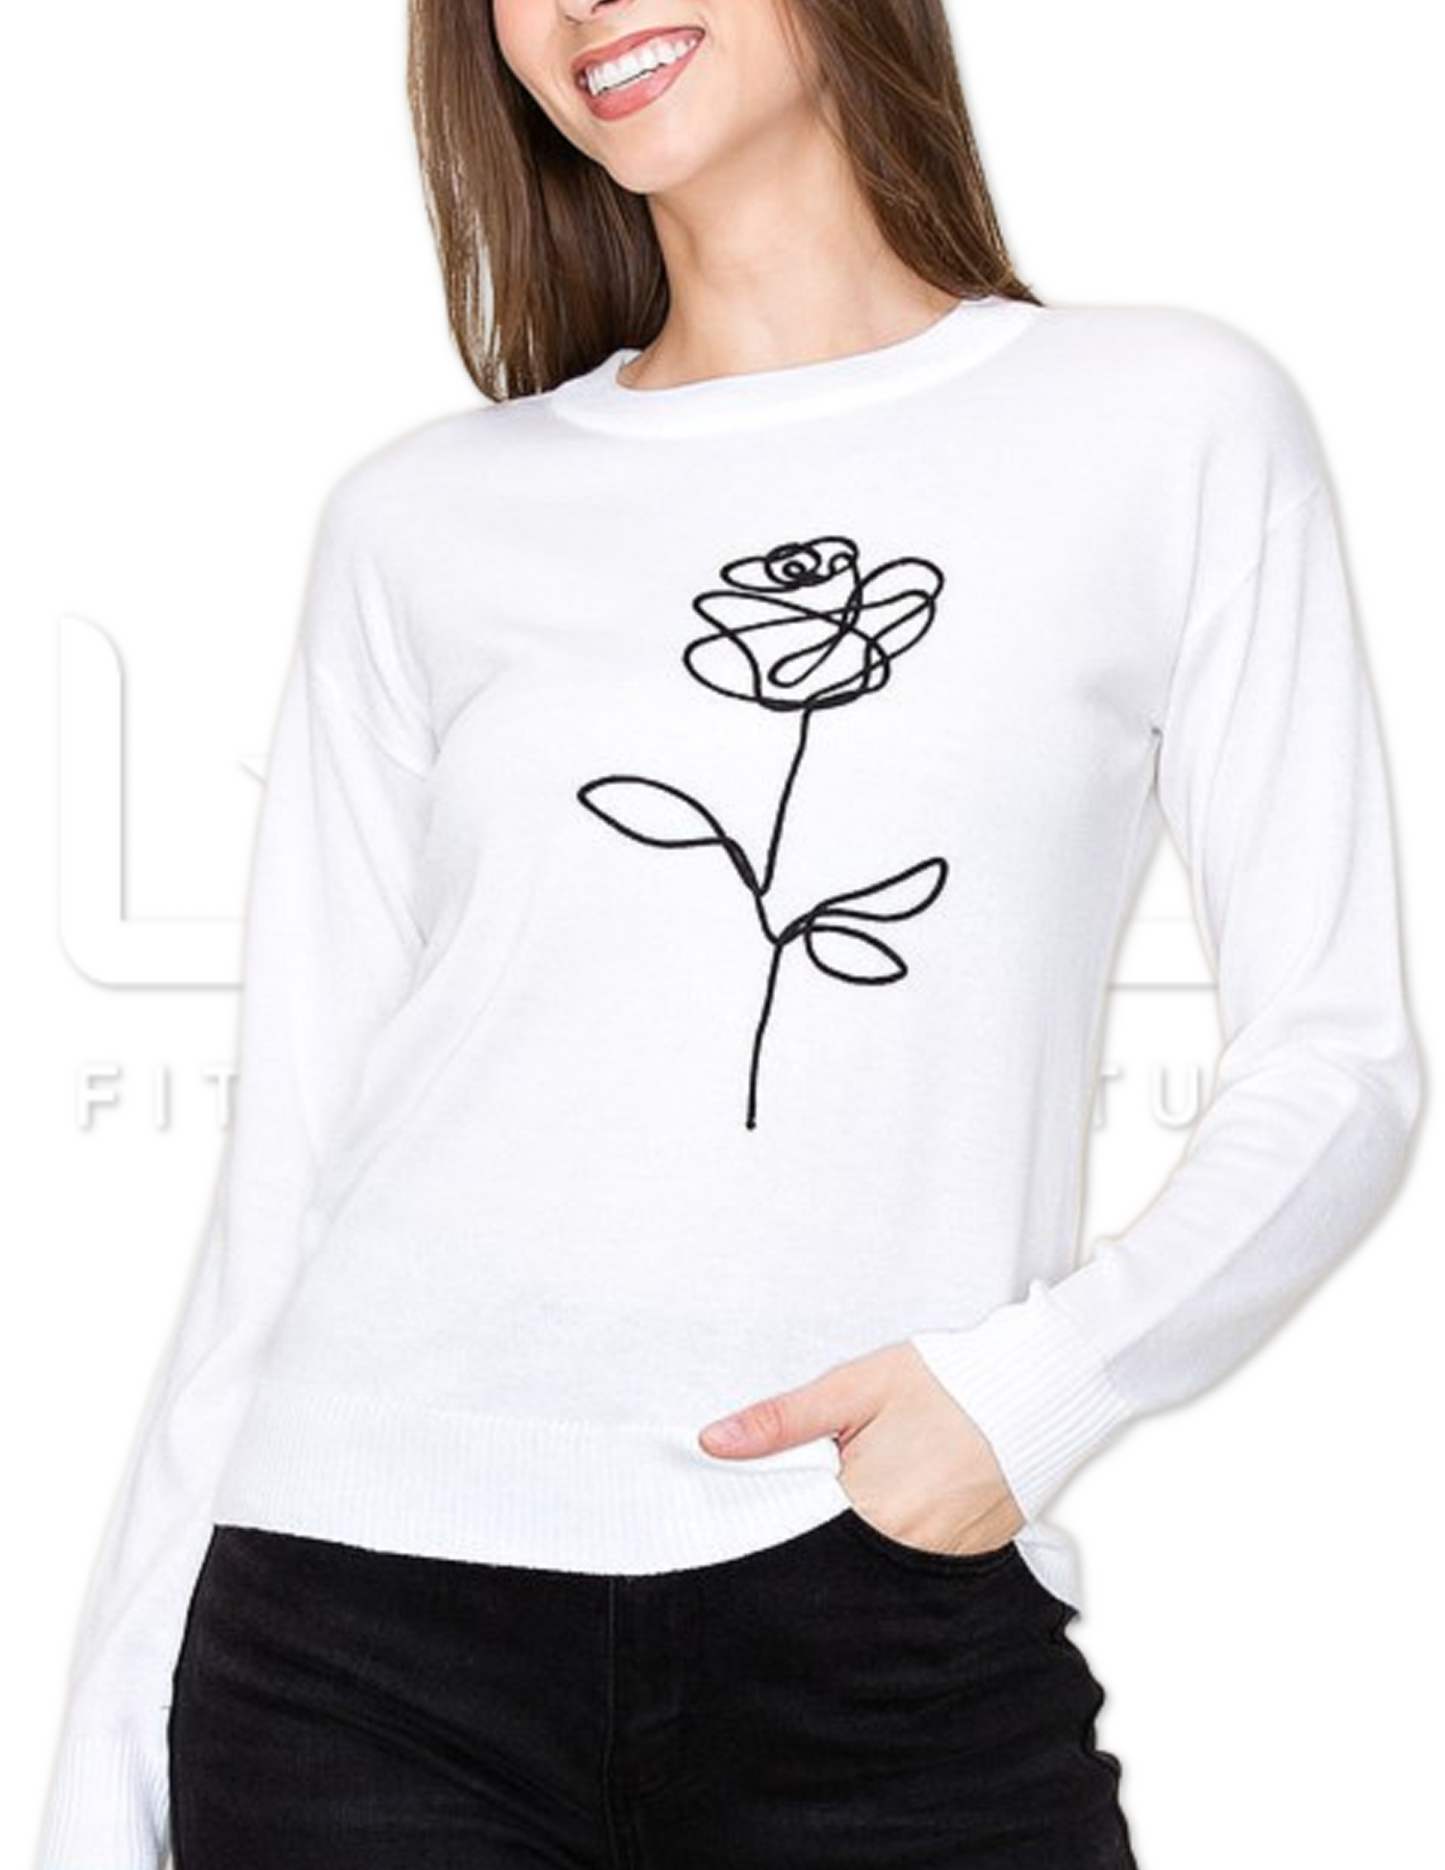 Flower Embroidered Sweater